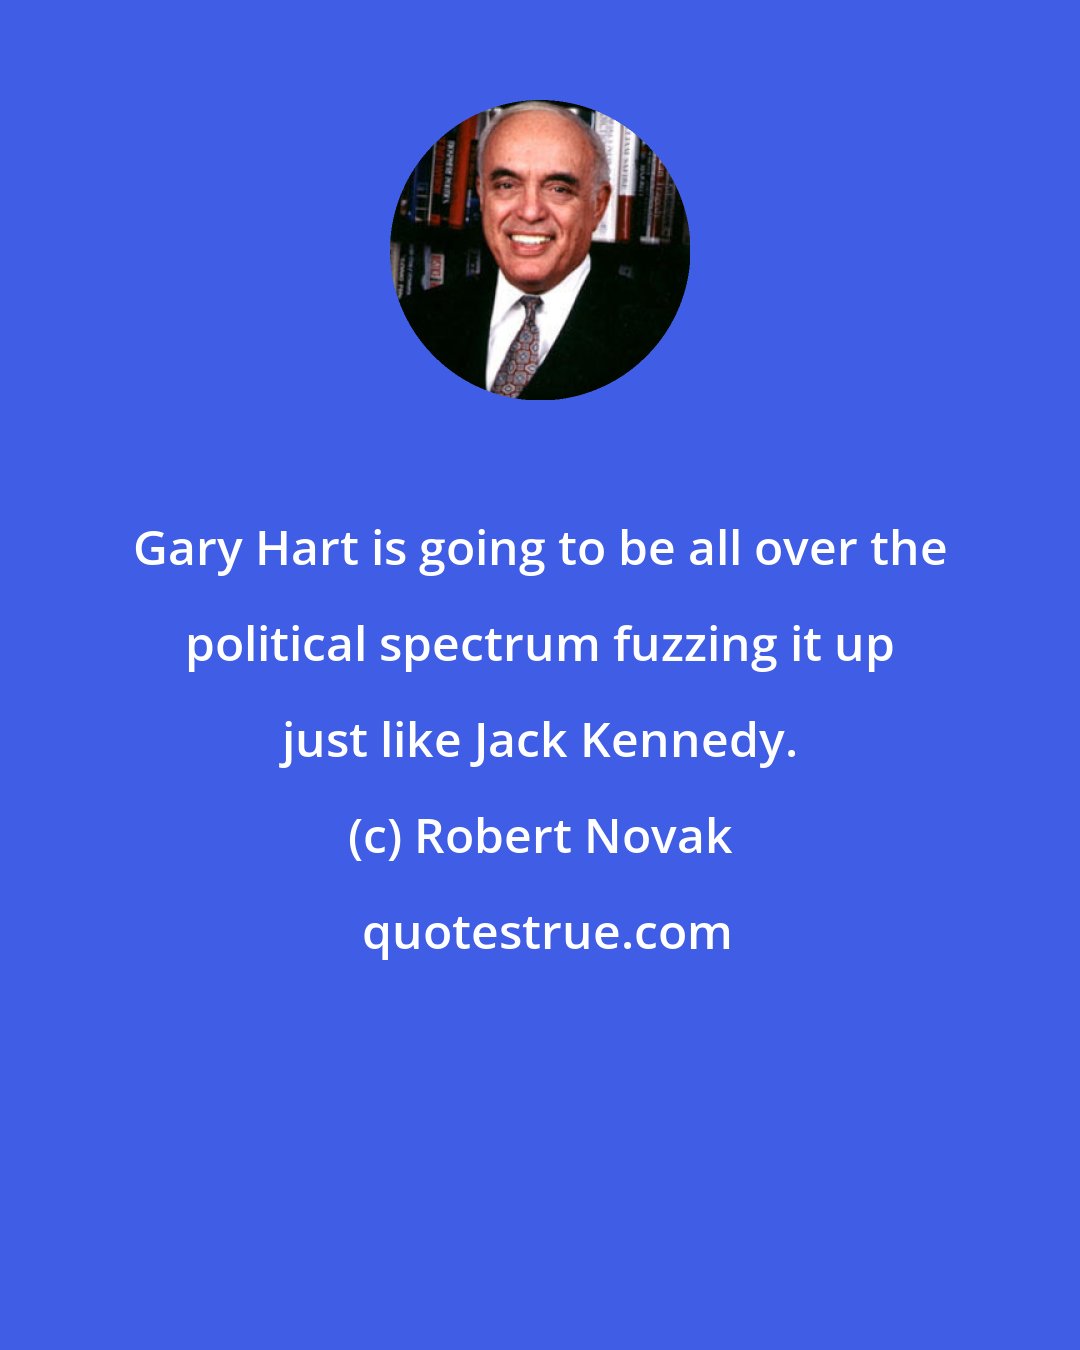 Robert Novak: Gary Hart is going to be all over the political spectrum fuzzing it up just like Jack Kennedy.